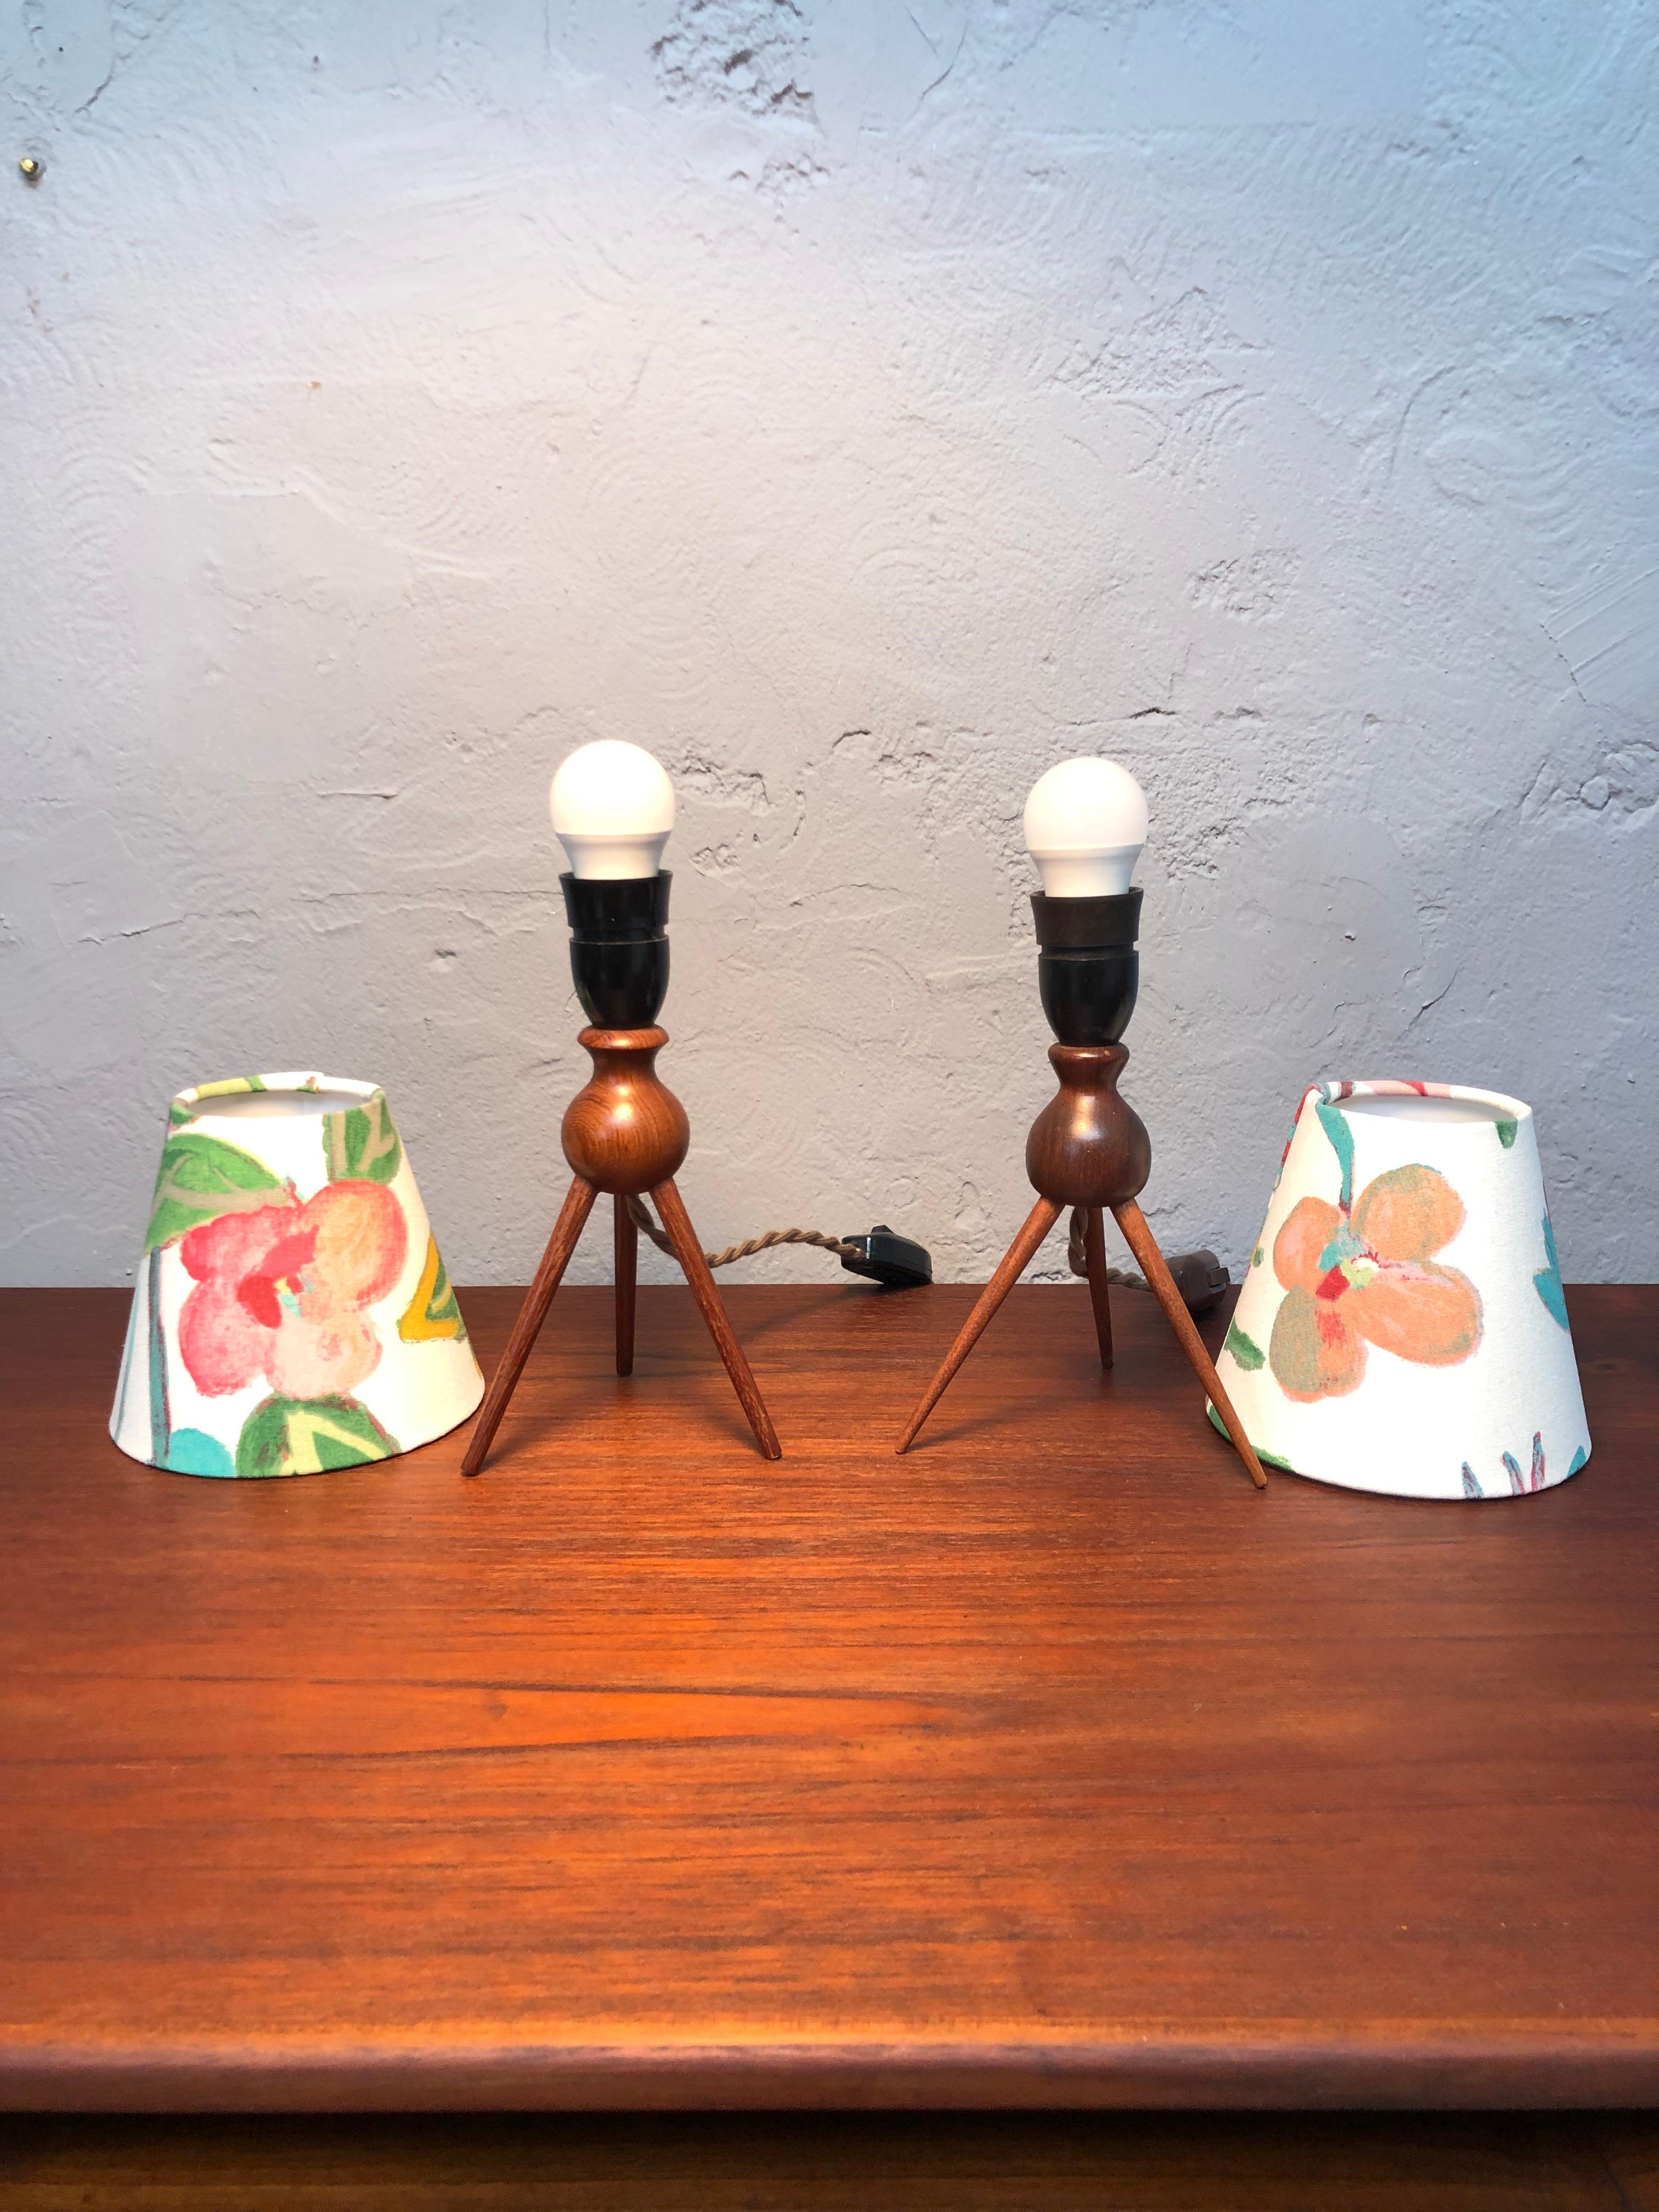 Mid-20th Century A Vintage Pair Of Danish Mid Century Modern Teak Table Lamps Shades Included For Sale